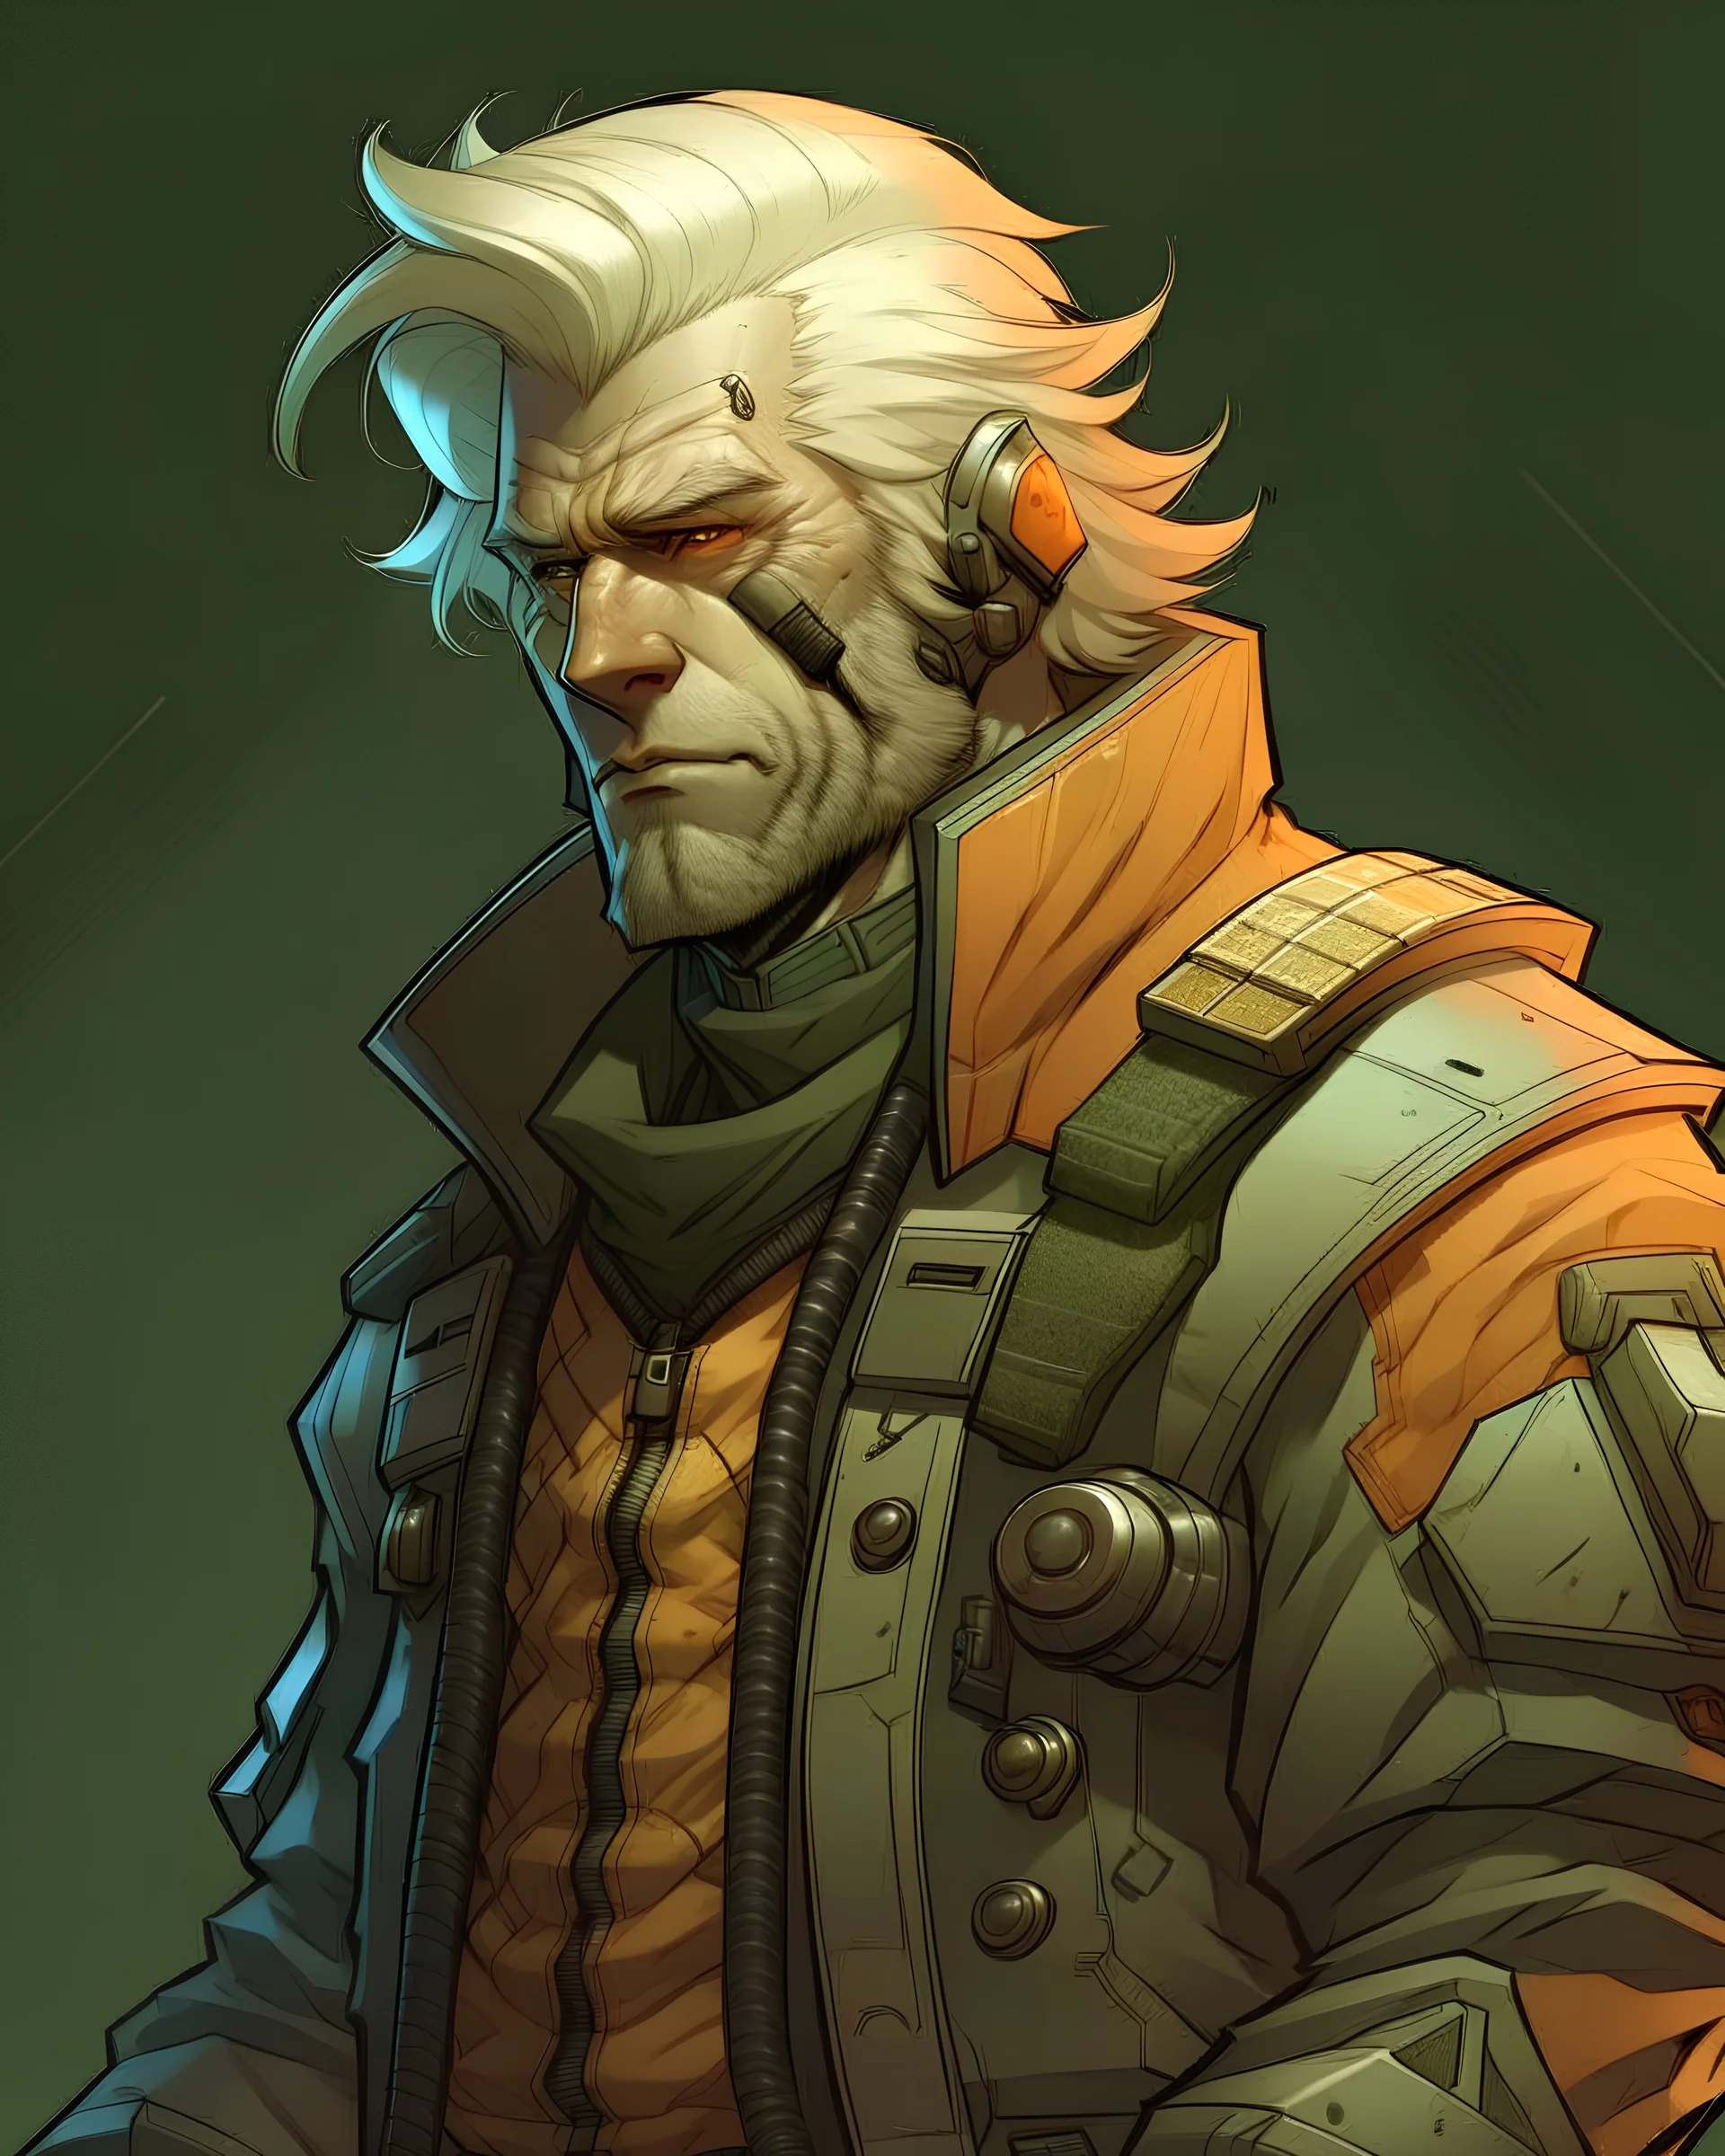 High Quality Science Fiction Character Portrait of an bounty hunter with bleached Hair in a Bomber Jacket. Illustrated in the Style of Disney